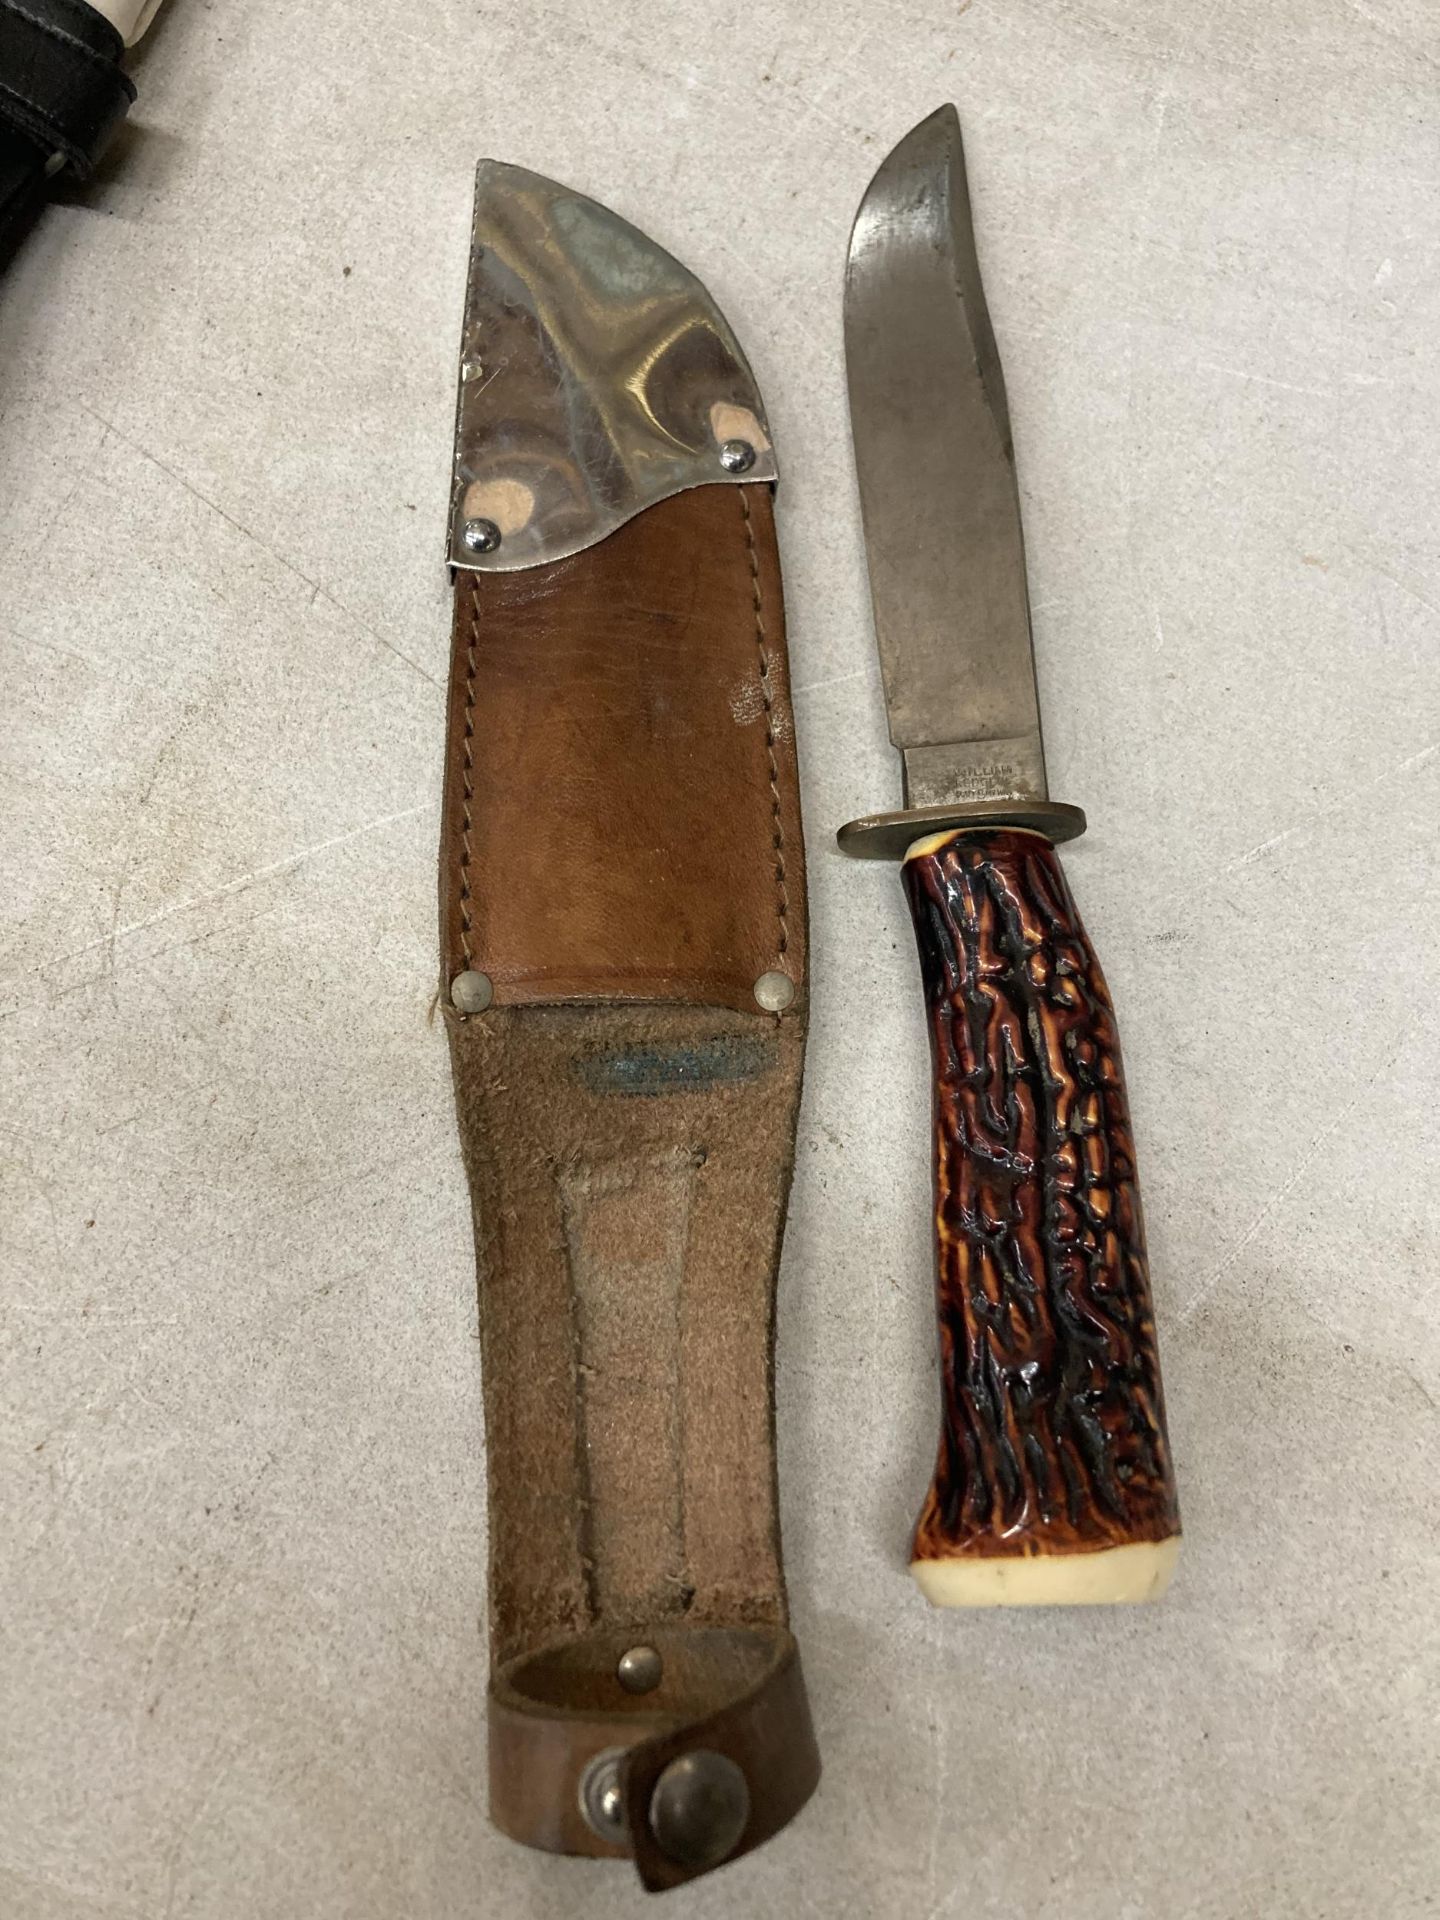 A WILLIAM RODGERS 1950'S SCOUT KNIFE - Image 2 of 3